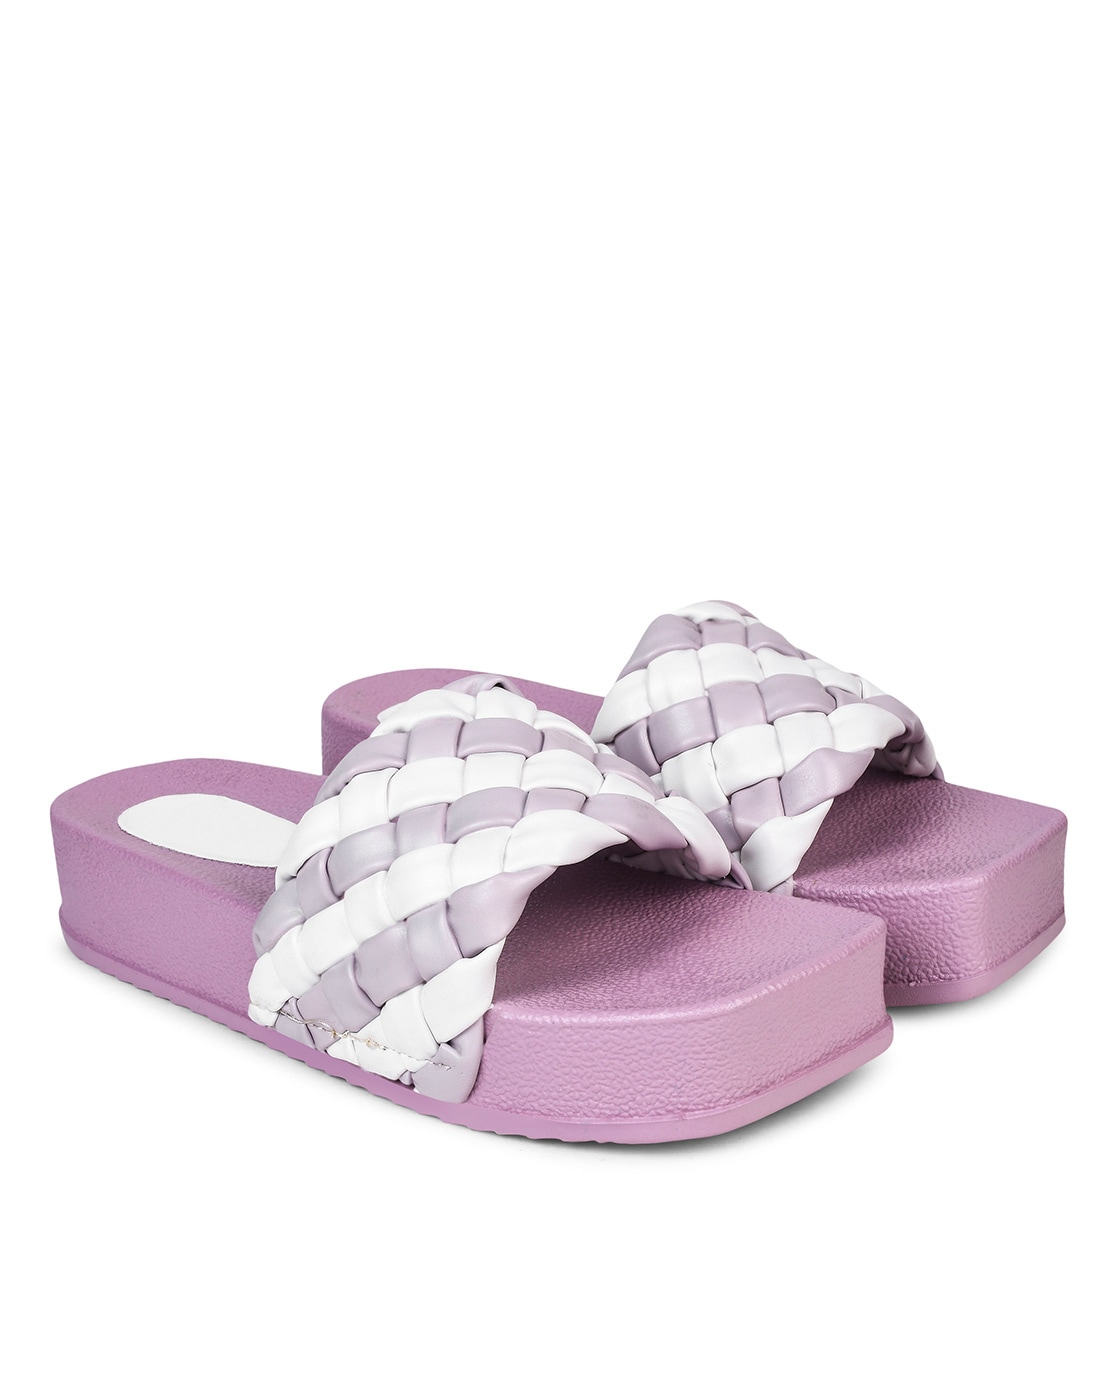 Buy Lavender Heeled Sandals for Women by FROH FEET Online